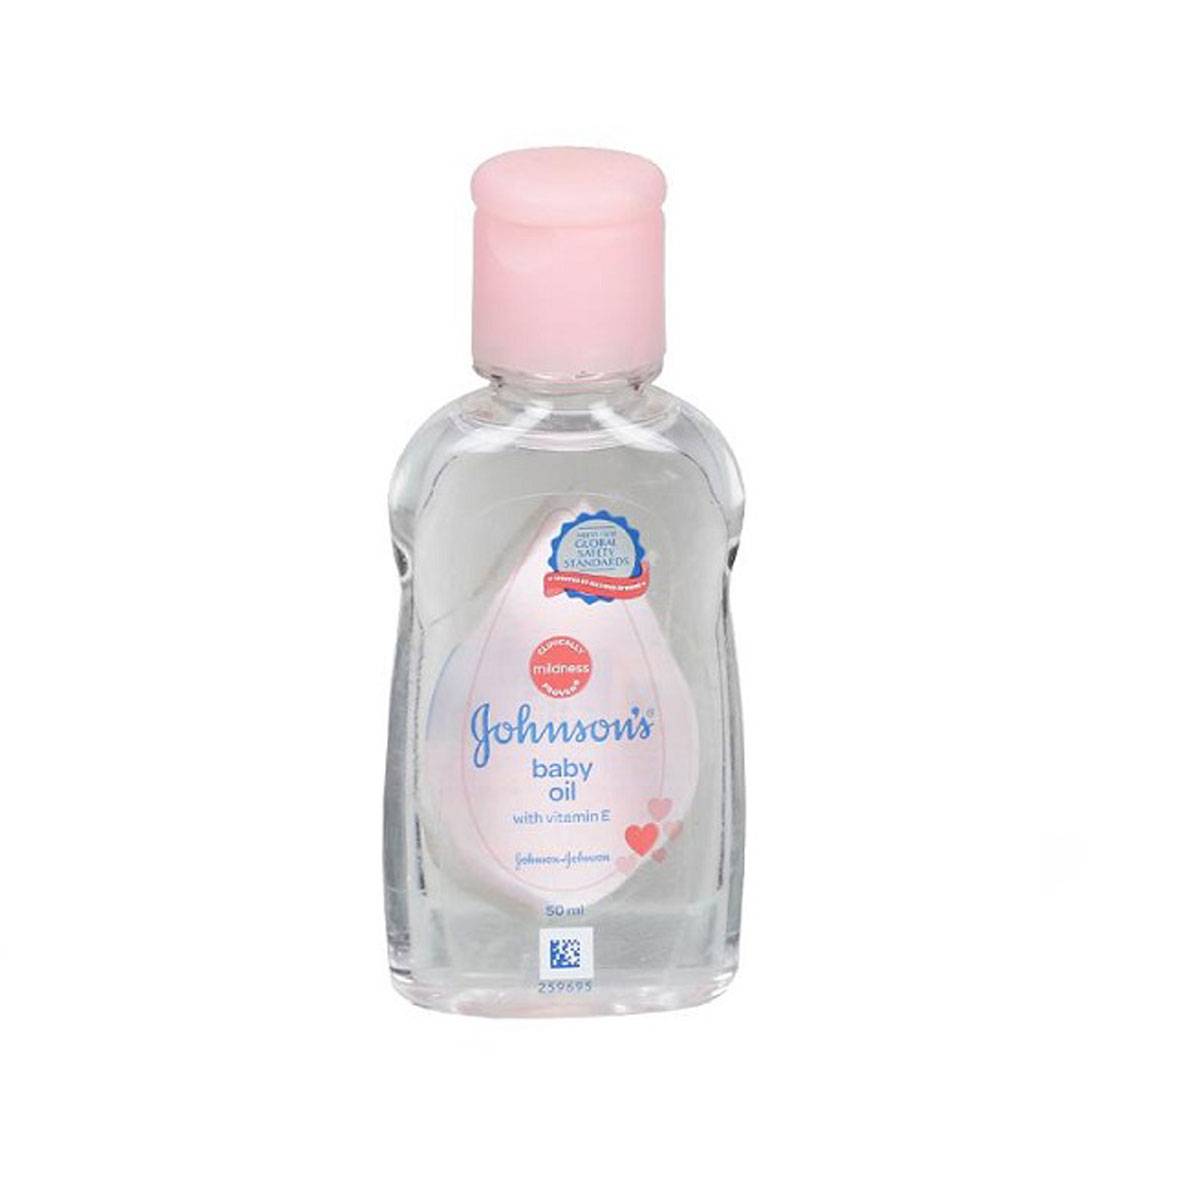 https://cccapi.cococa.in/public/uploads/product_images/product_image_1200x1200/test-Johnsons-Baby-Oil,-50ml.jpg